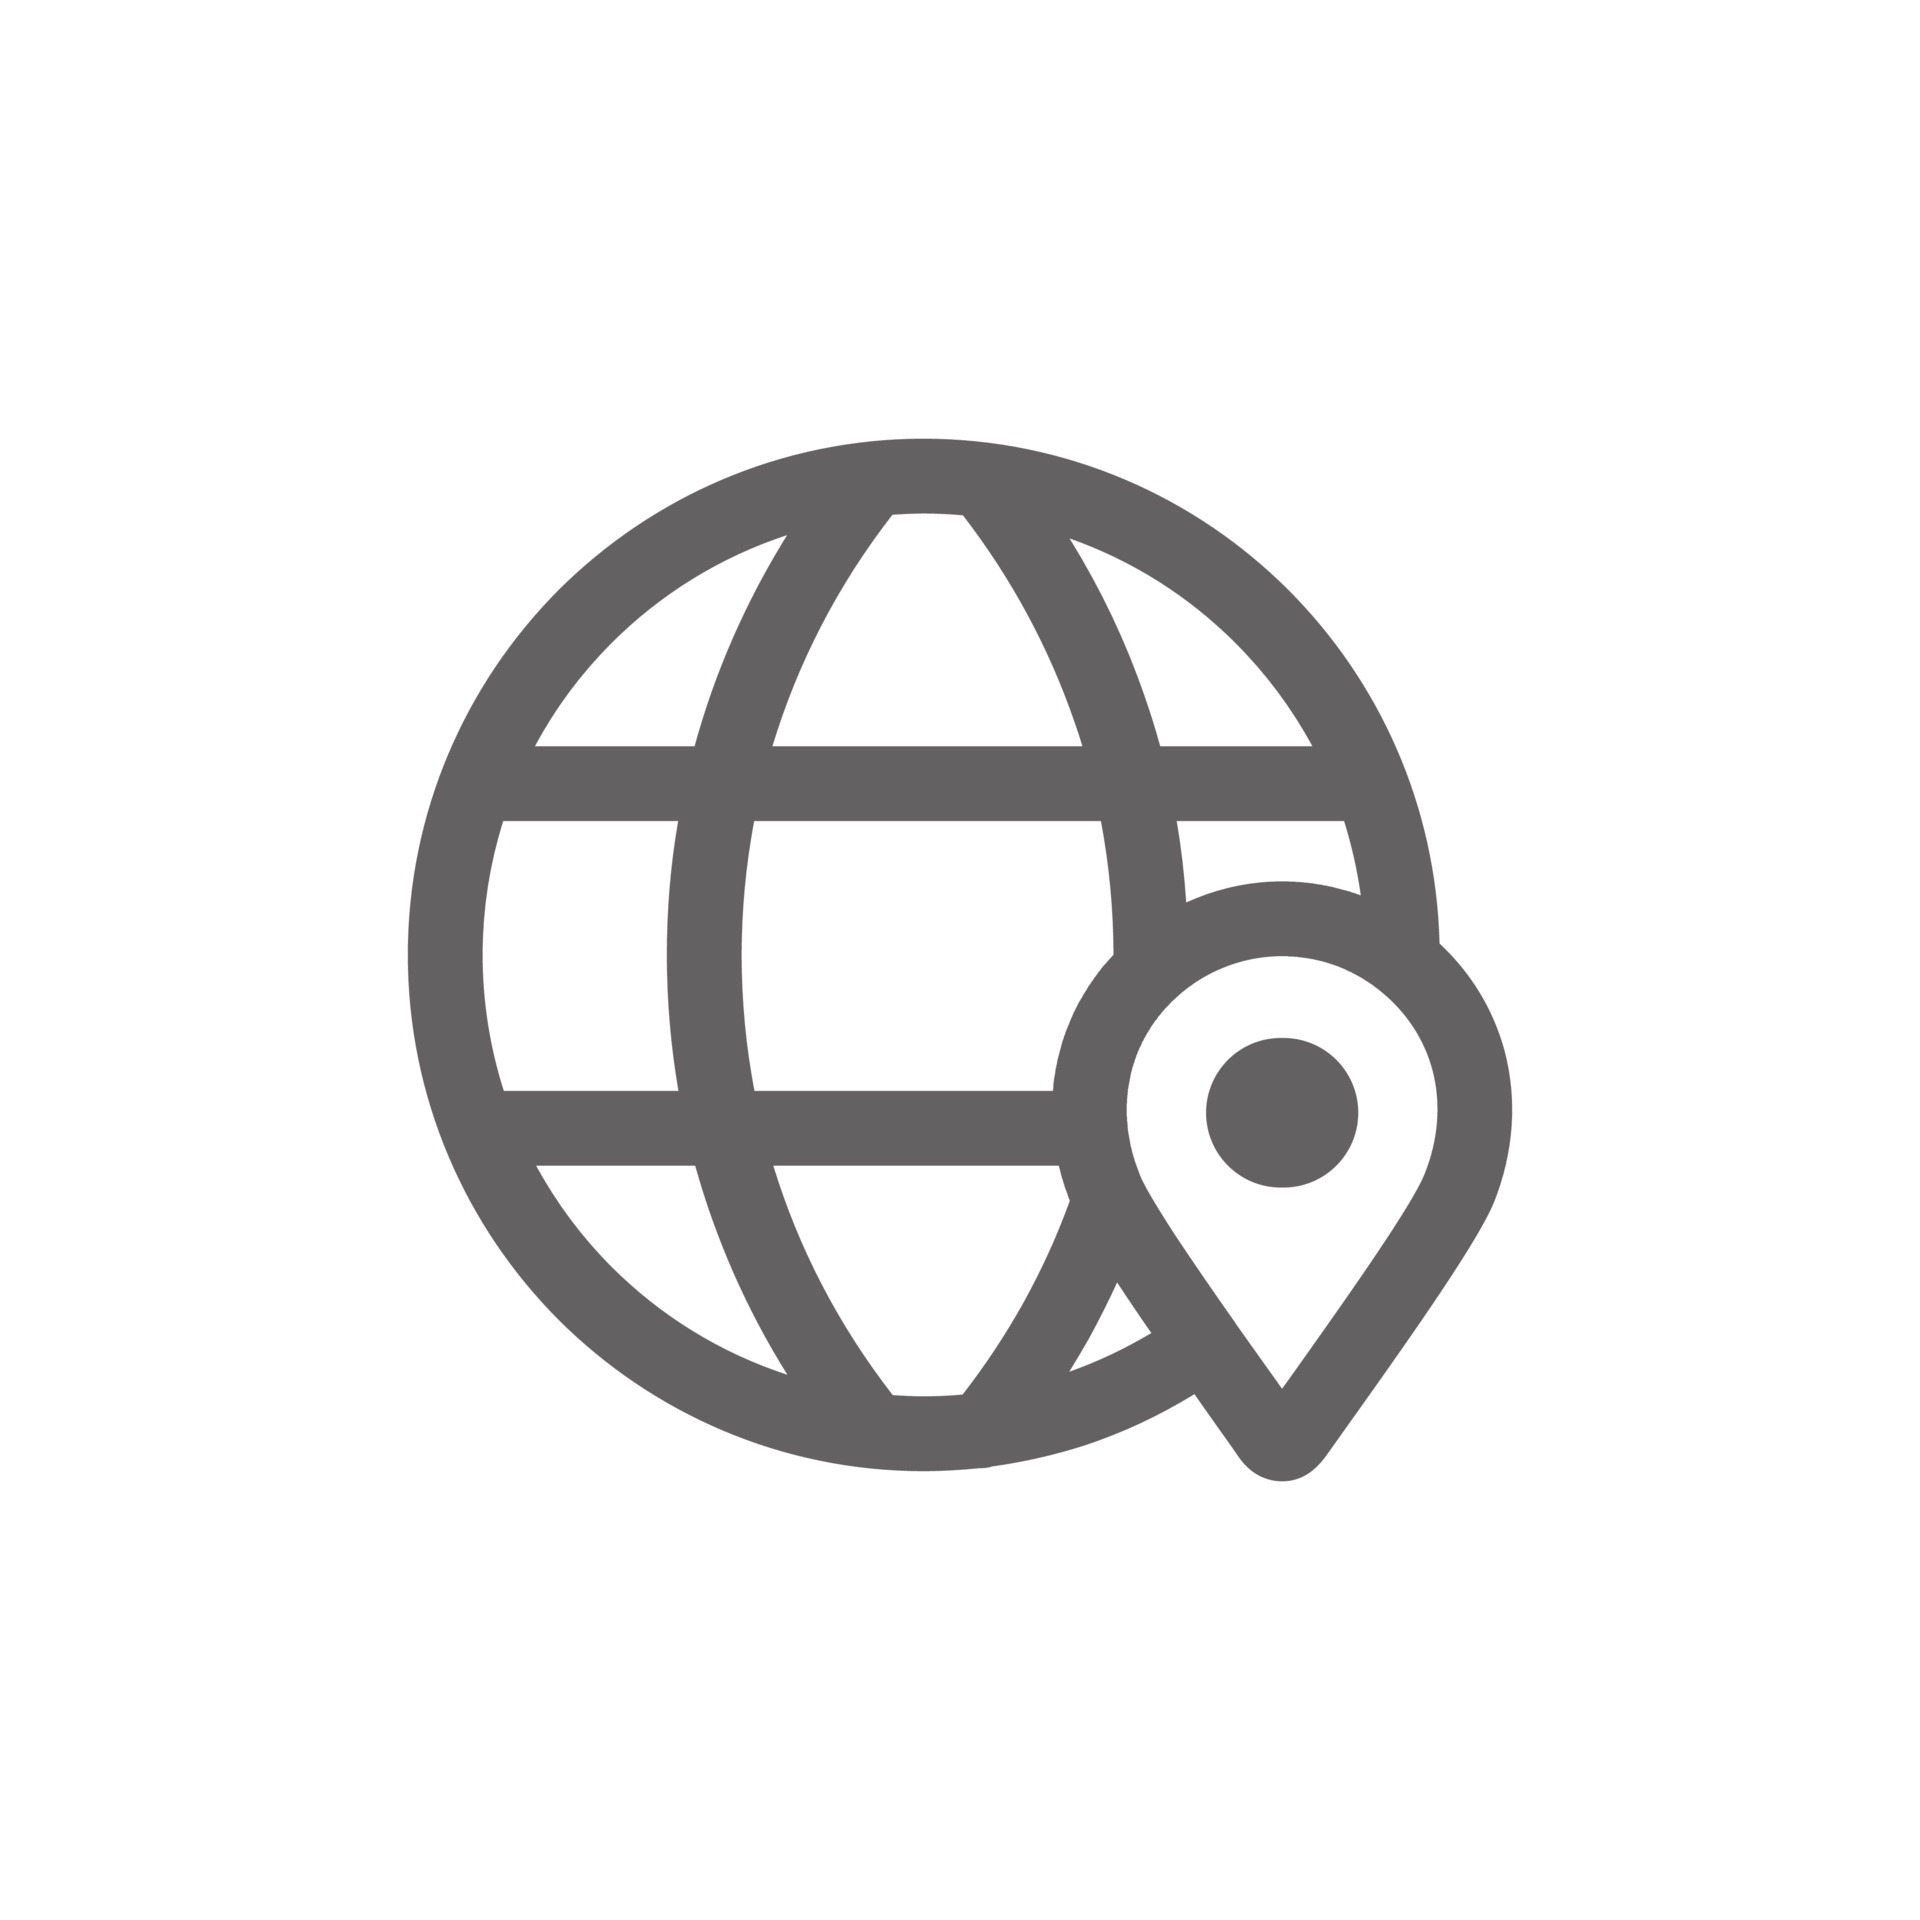 browse location icon. Perfect for map icon or user interface ...